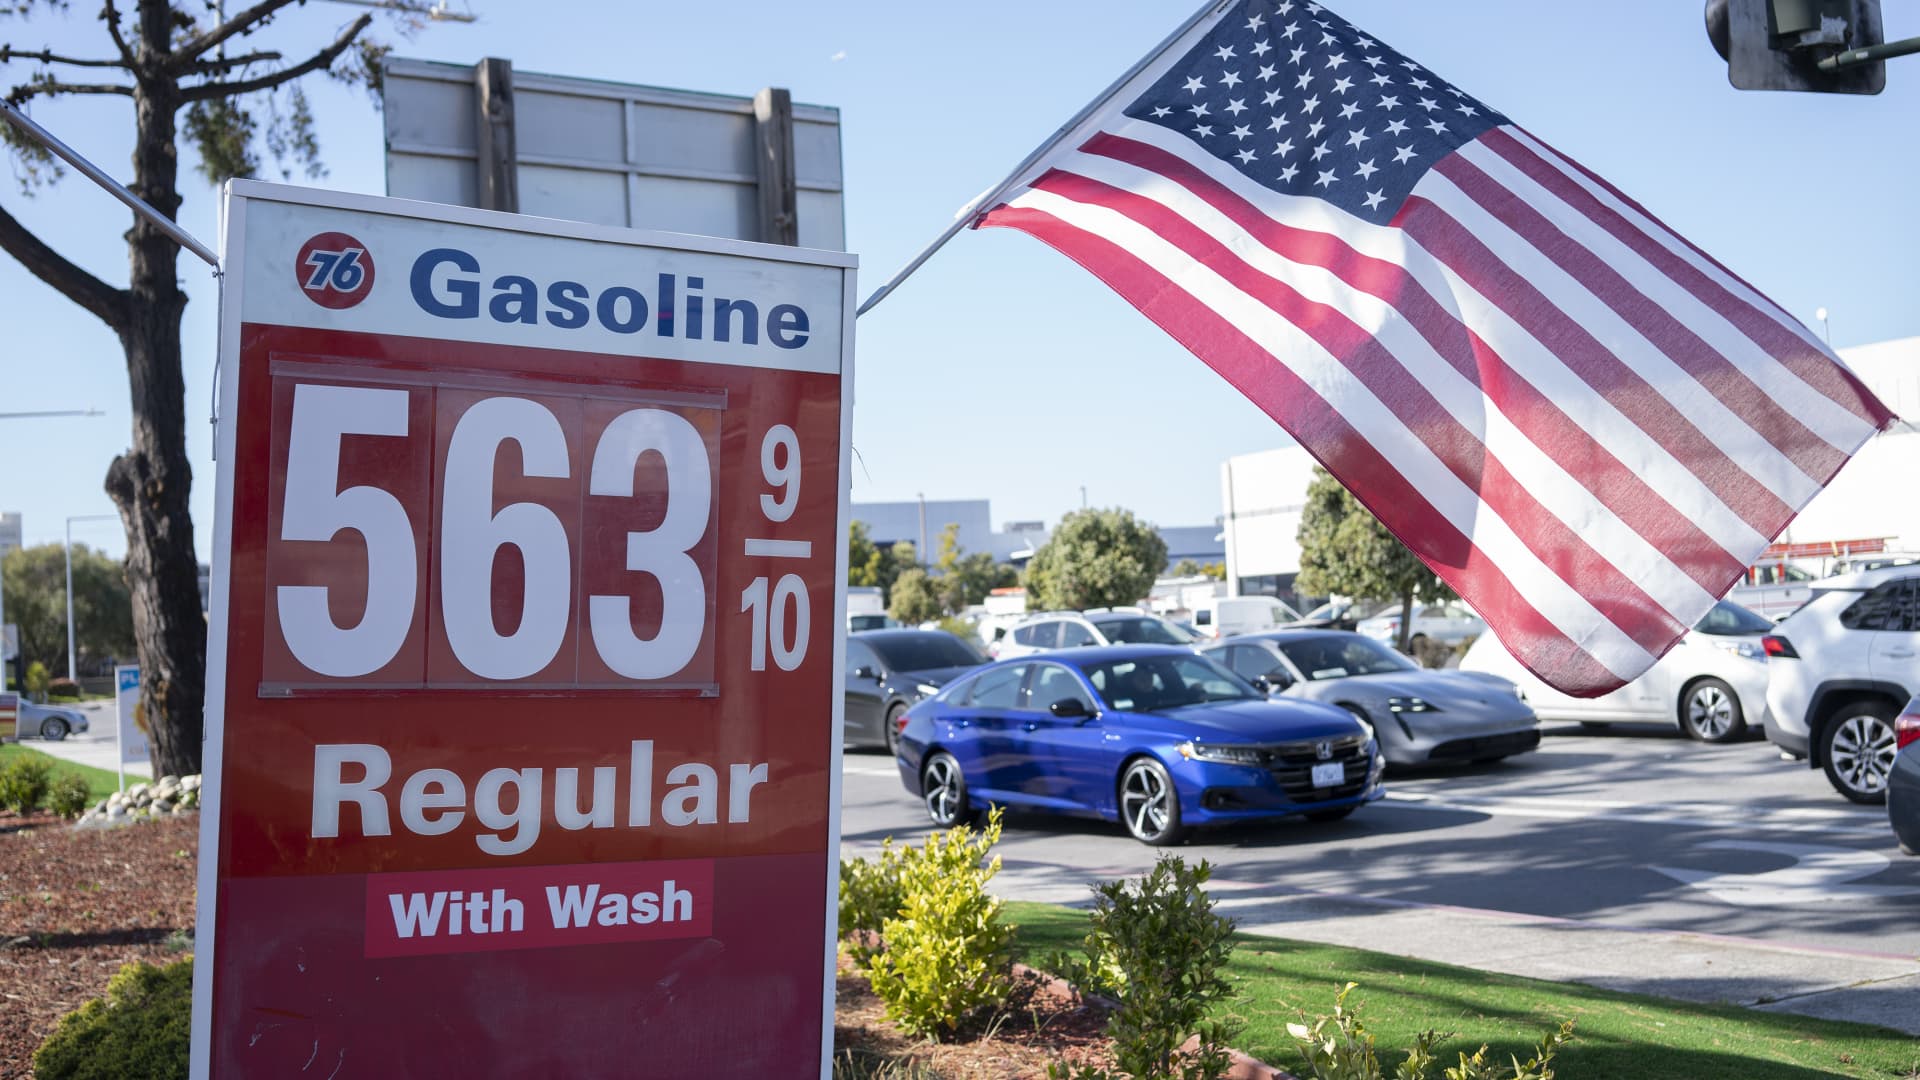 Gasoline prices are displayed at a gas station on April 12, 2022 in San Mateo County, California.